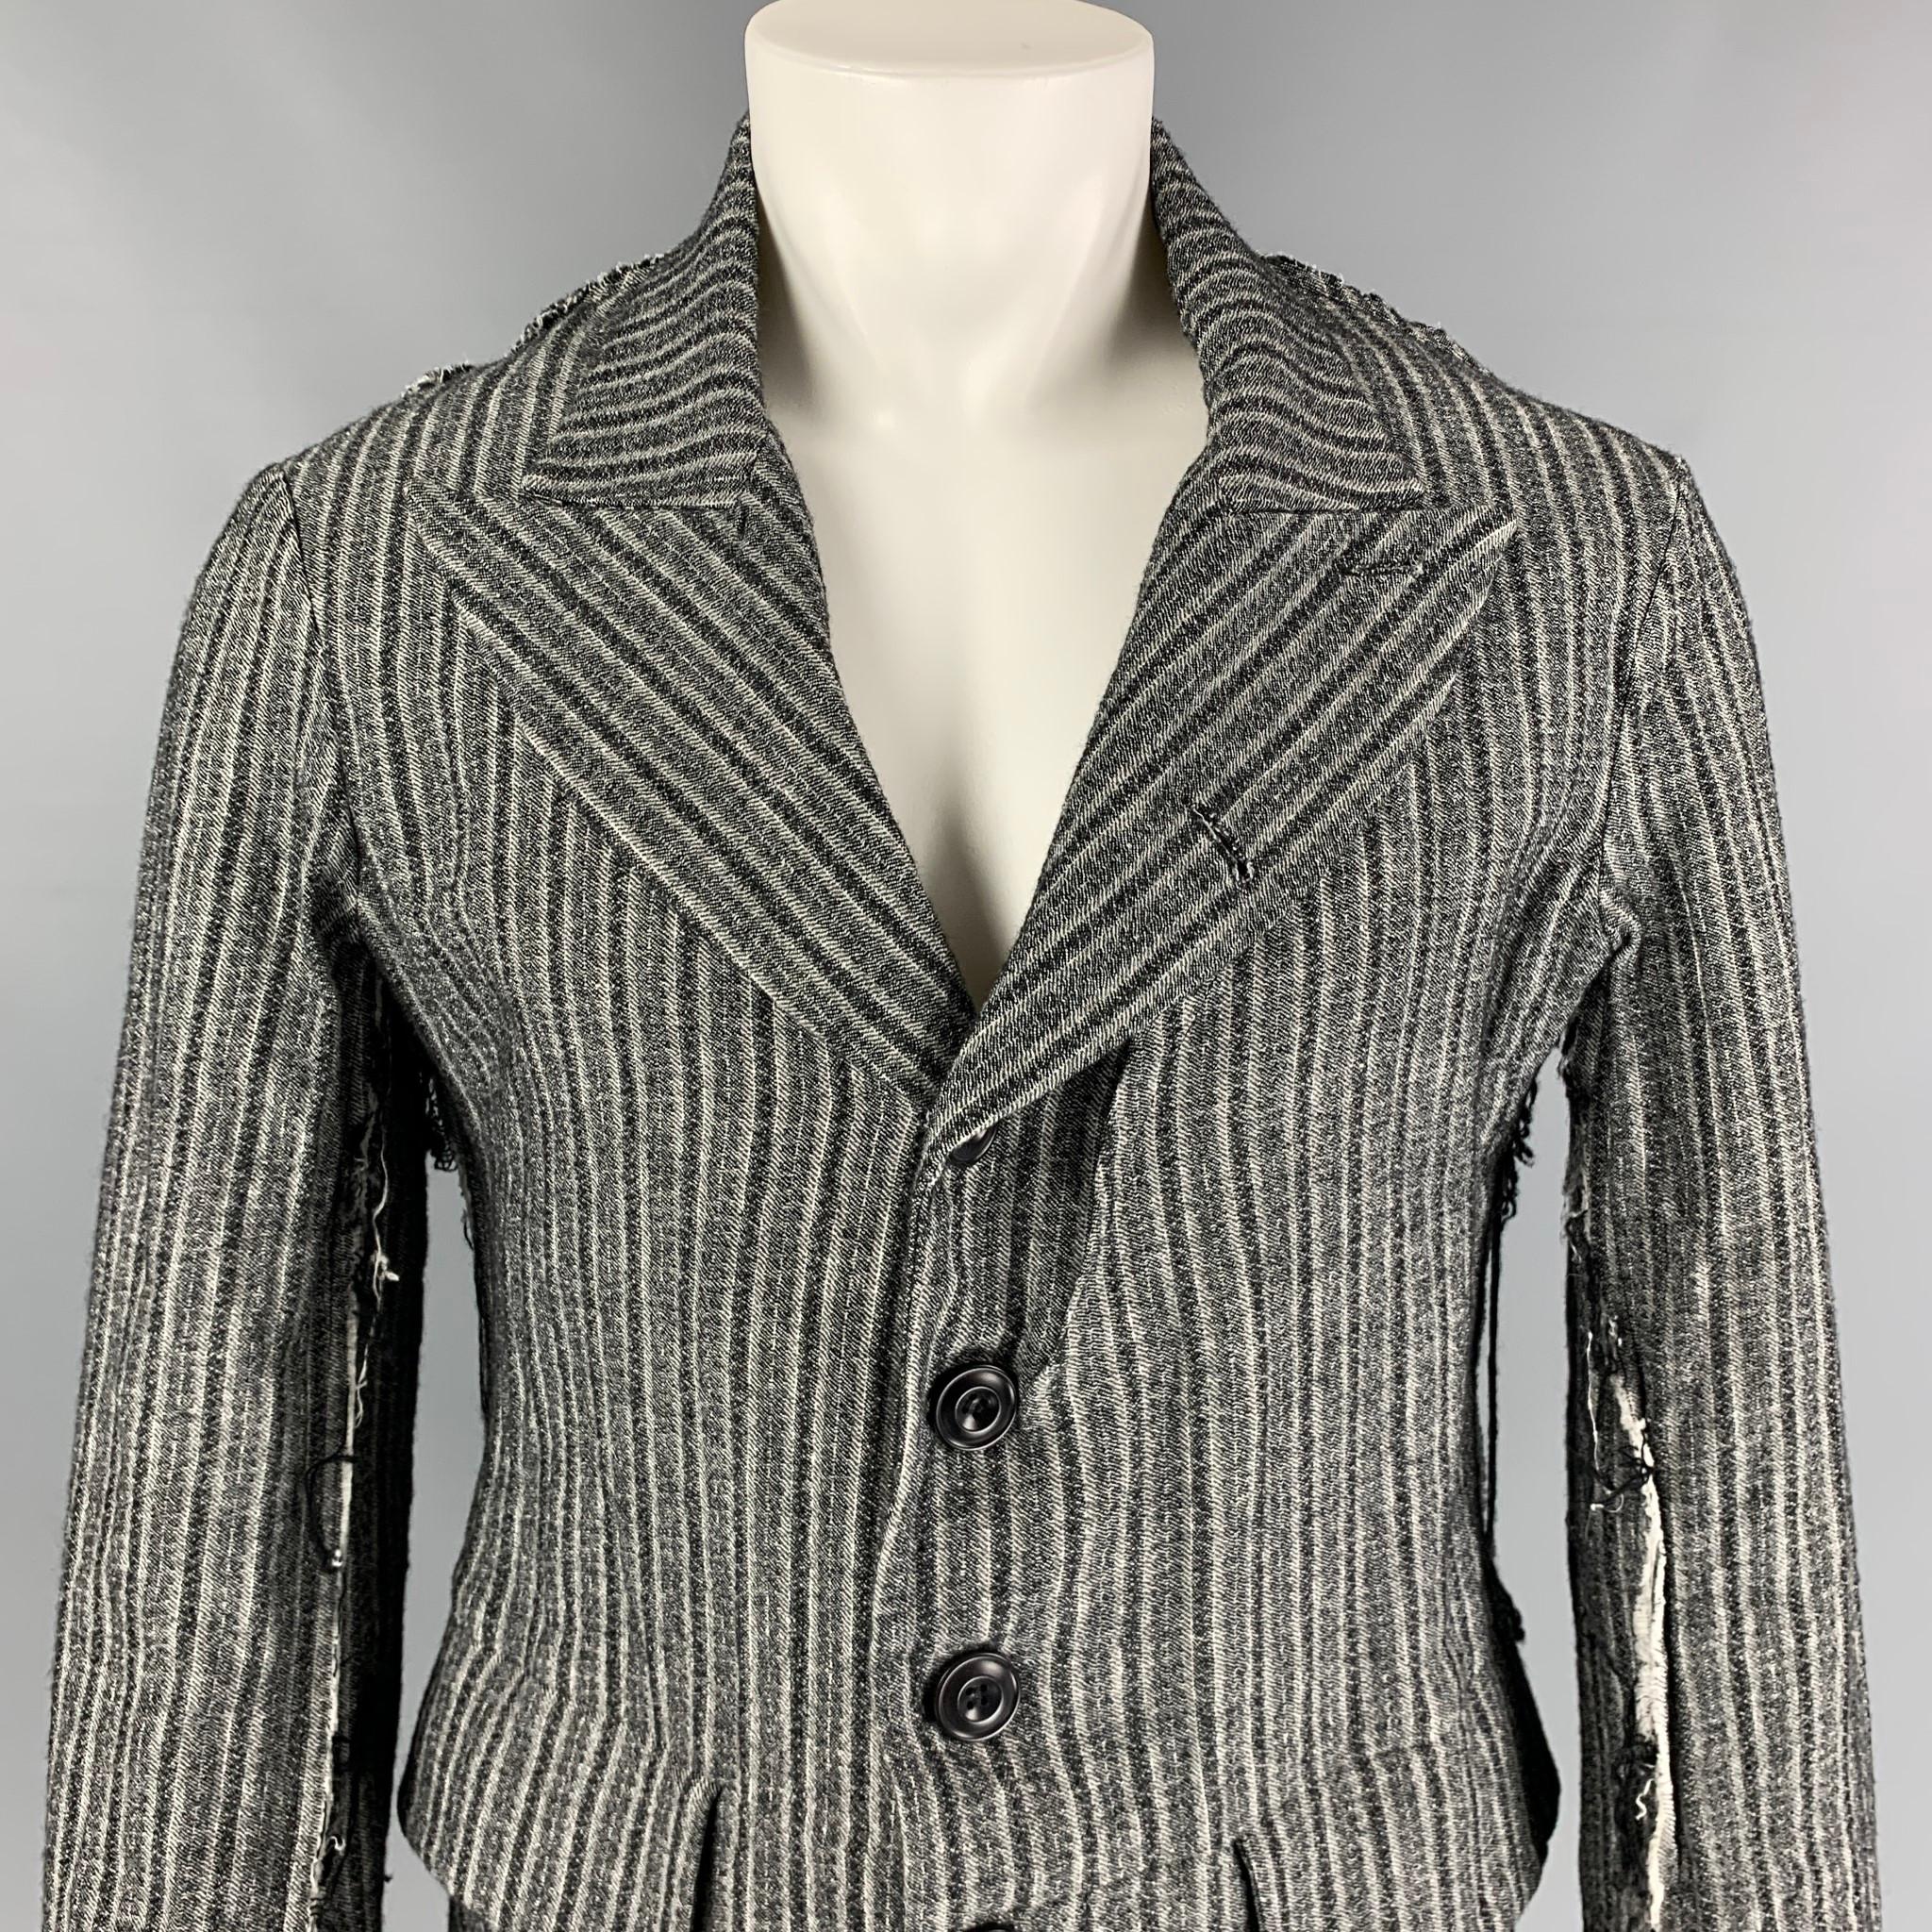 JOHN ALEXANDER SKELTON from L'ECLAIREUR sport coat comes in a grey stripe material featuring a peak lapel, ribbed seams, distressed, flap pockets, and a buttoned closure. Made in England. 

Very Good Pre-Owned Condition.
Marked: